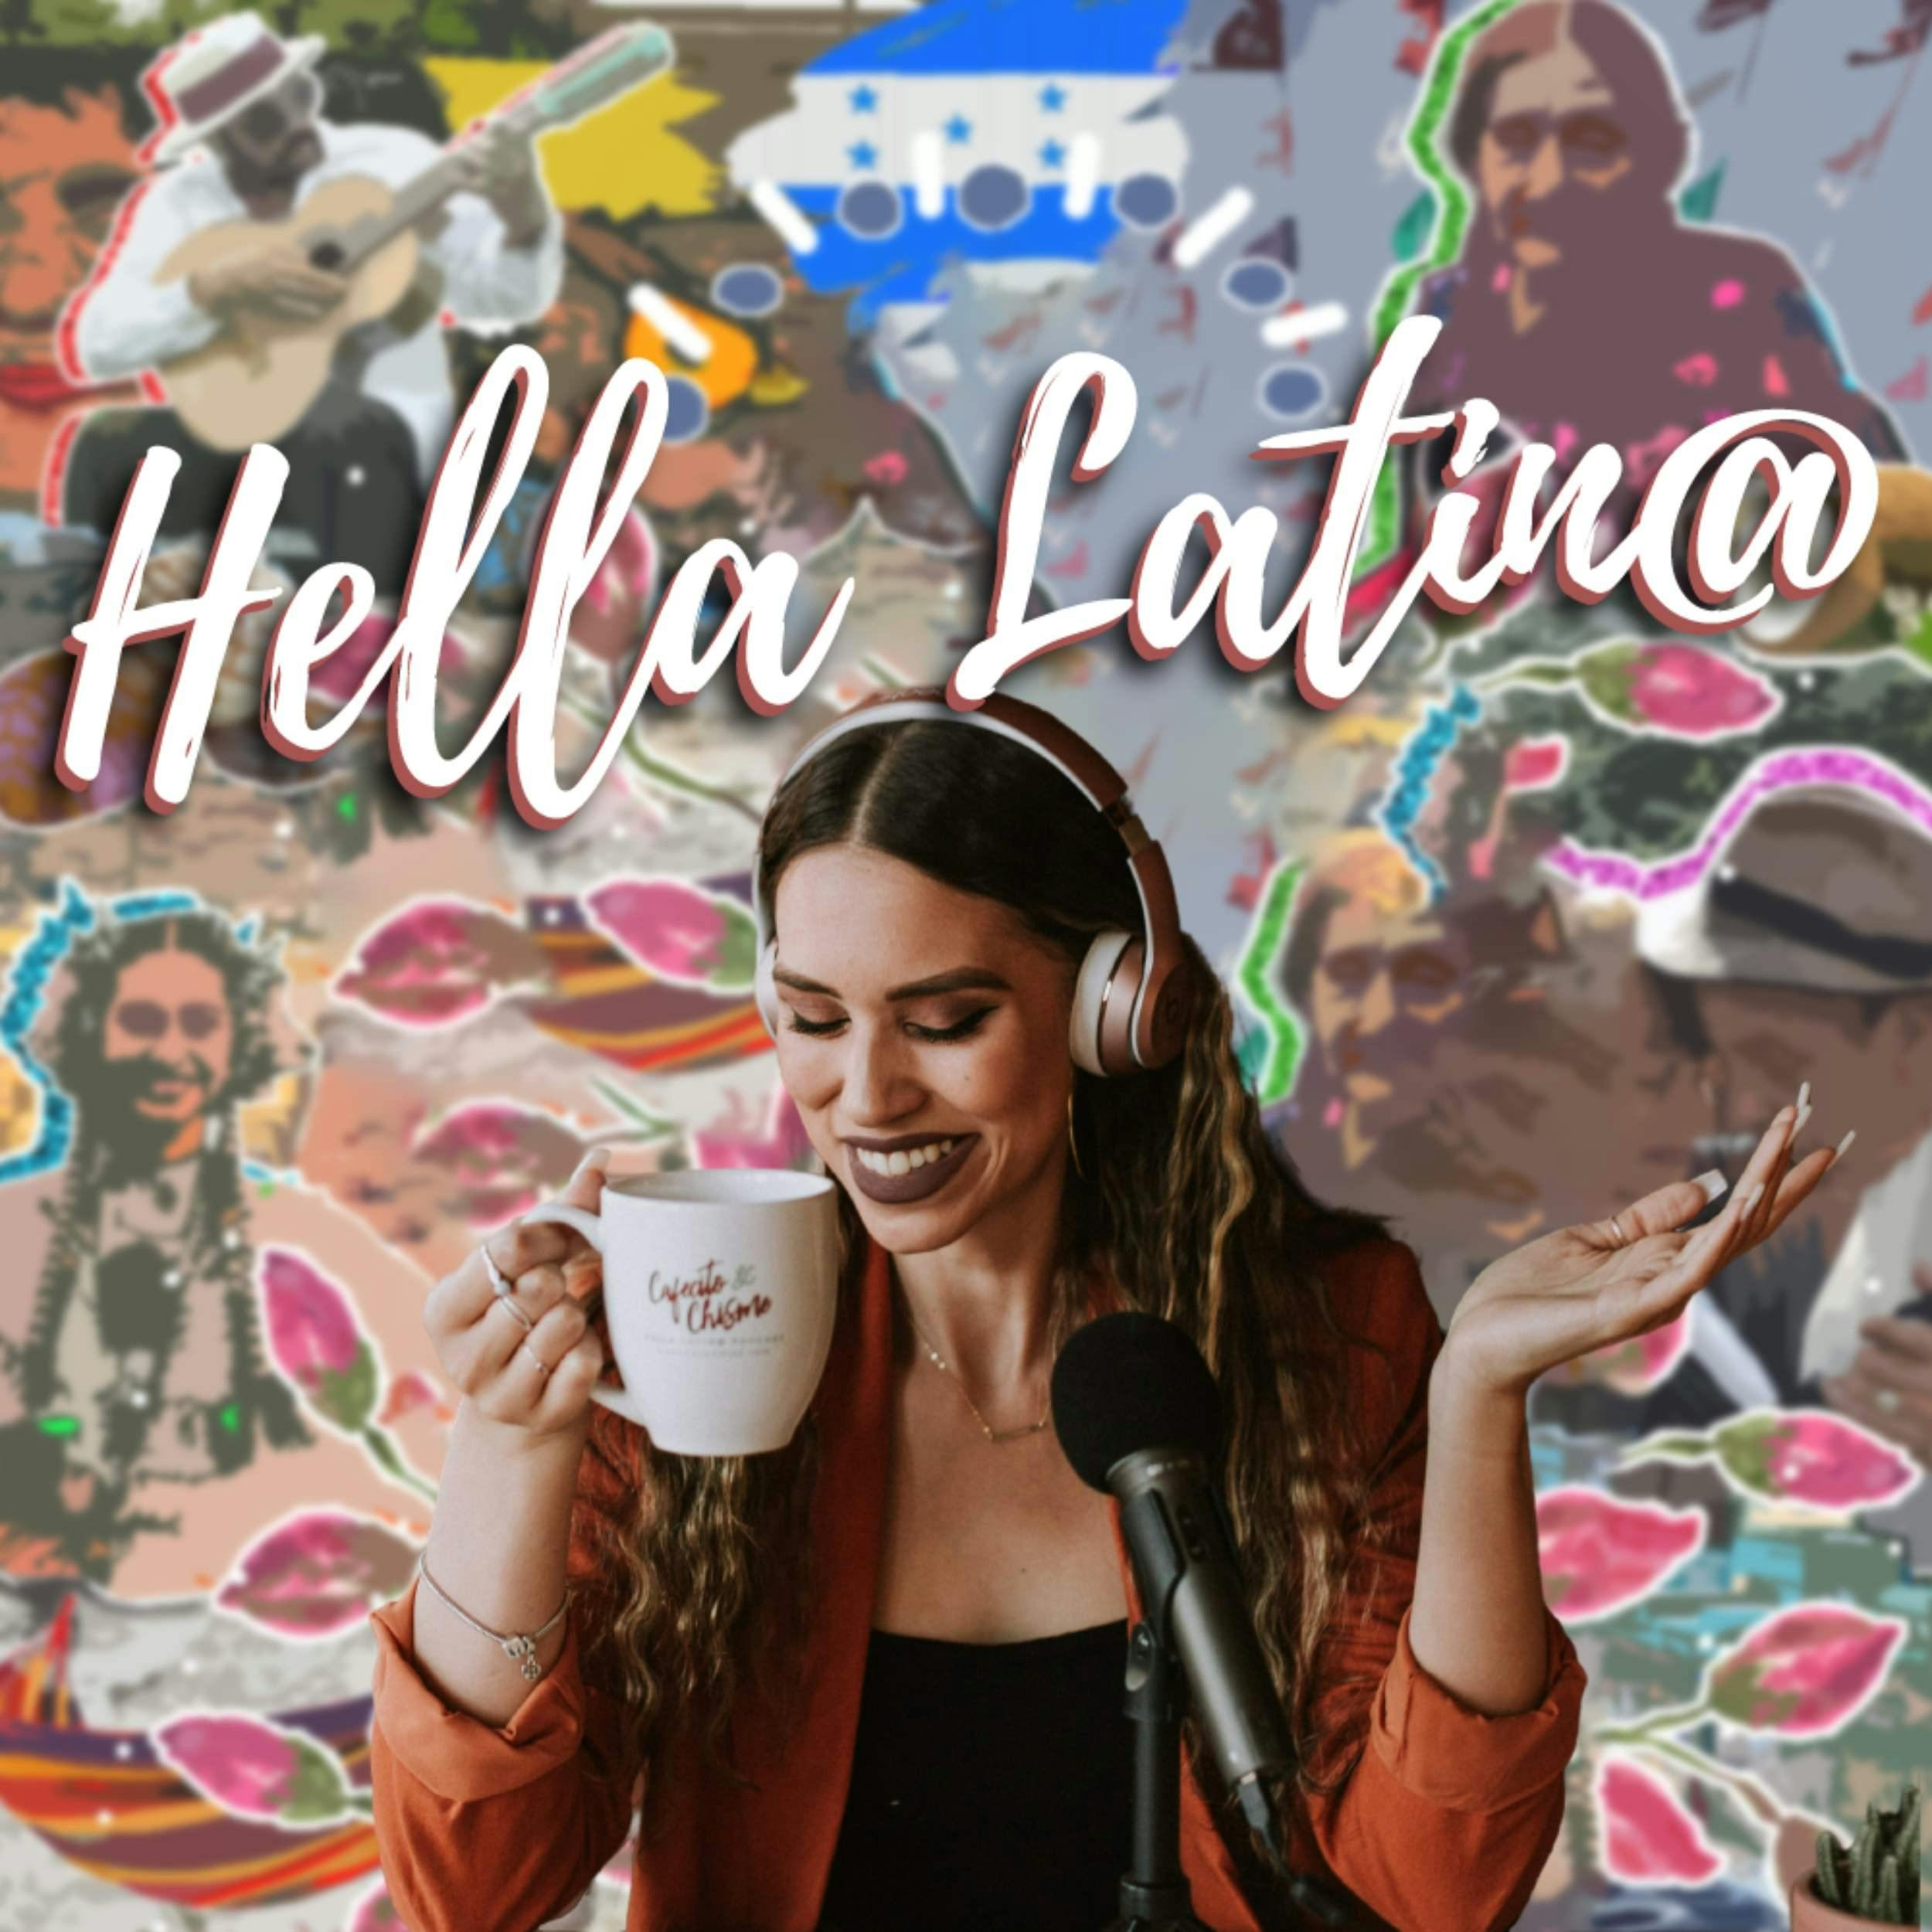 RisOn x Hella Latin@: Telling Your Story